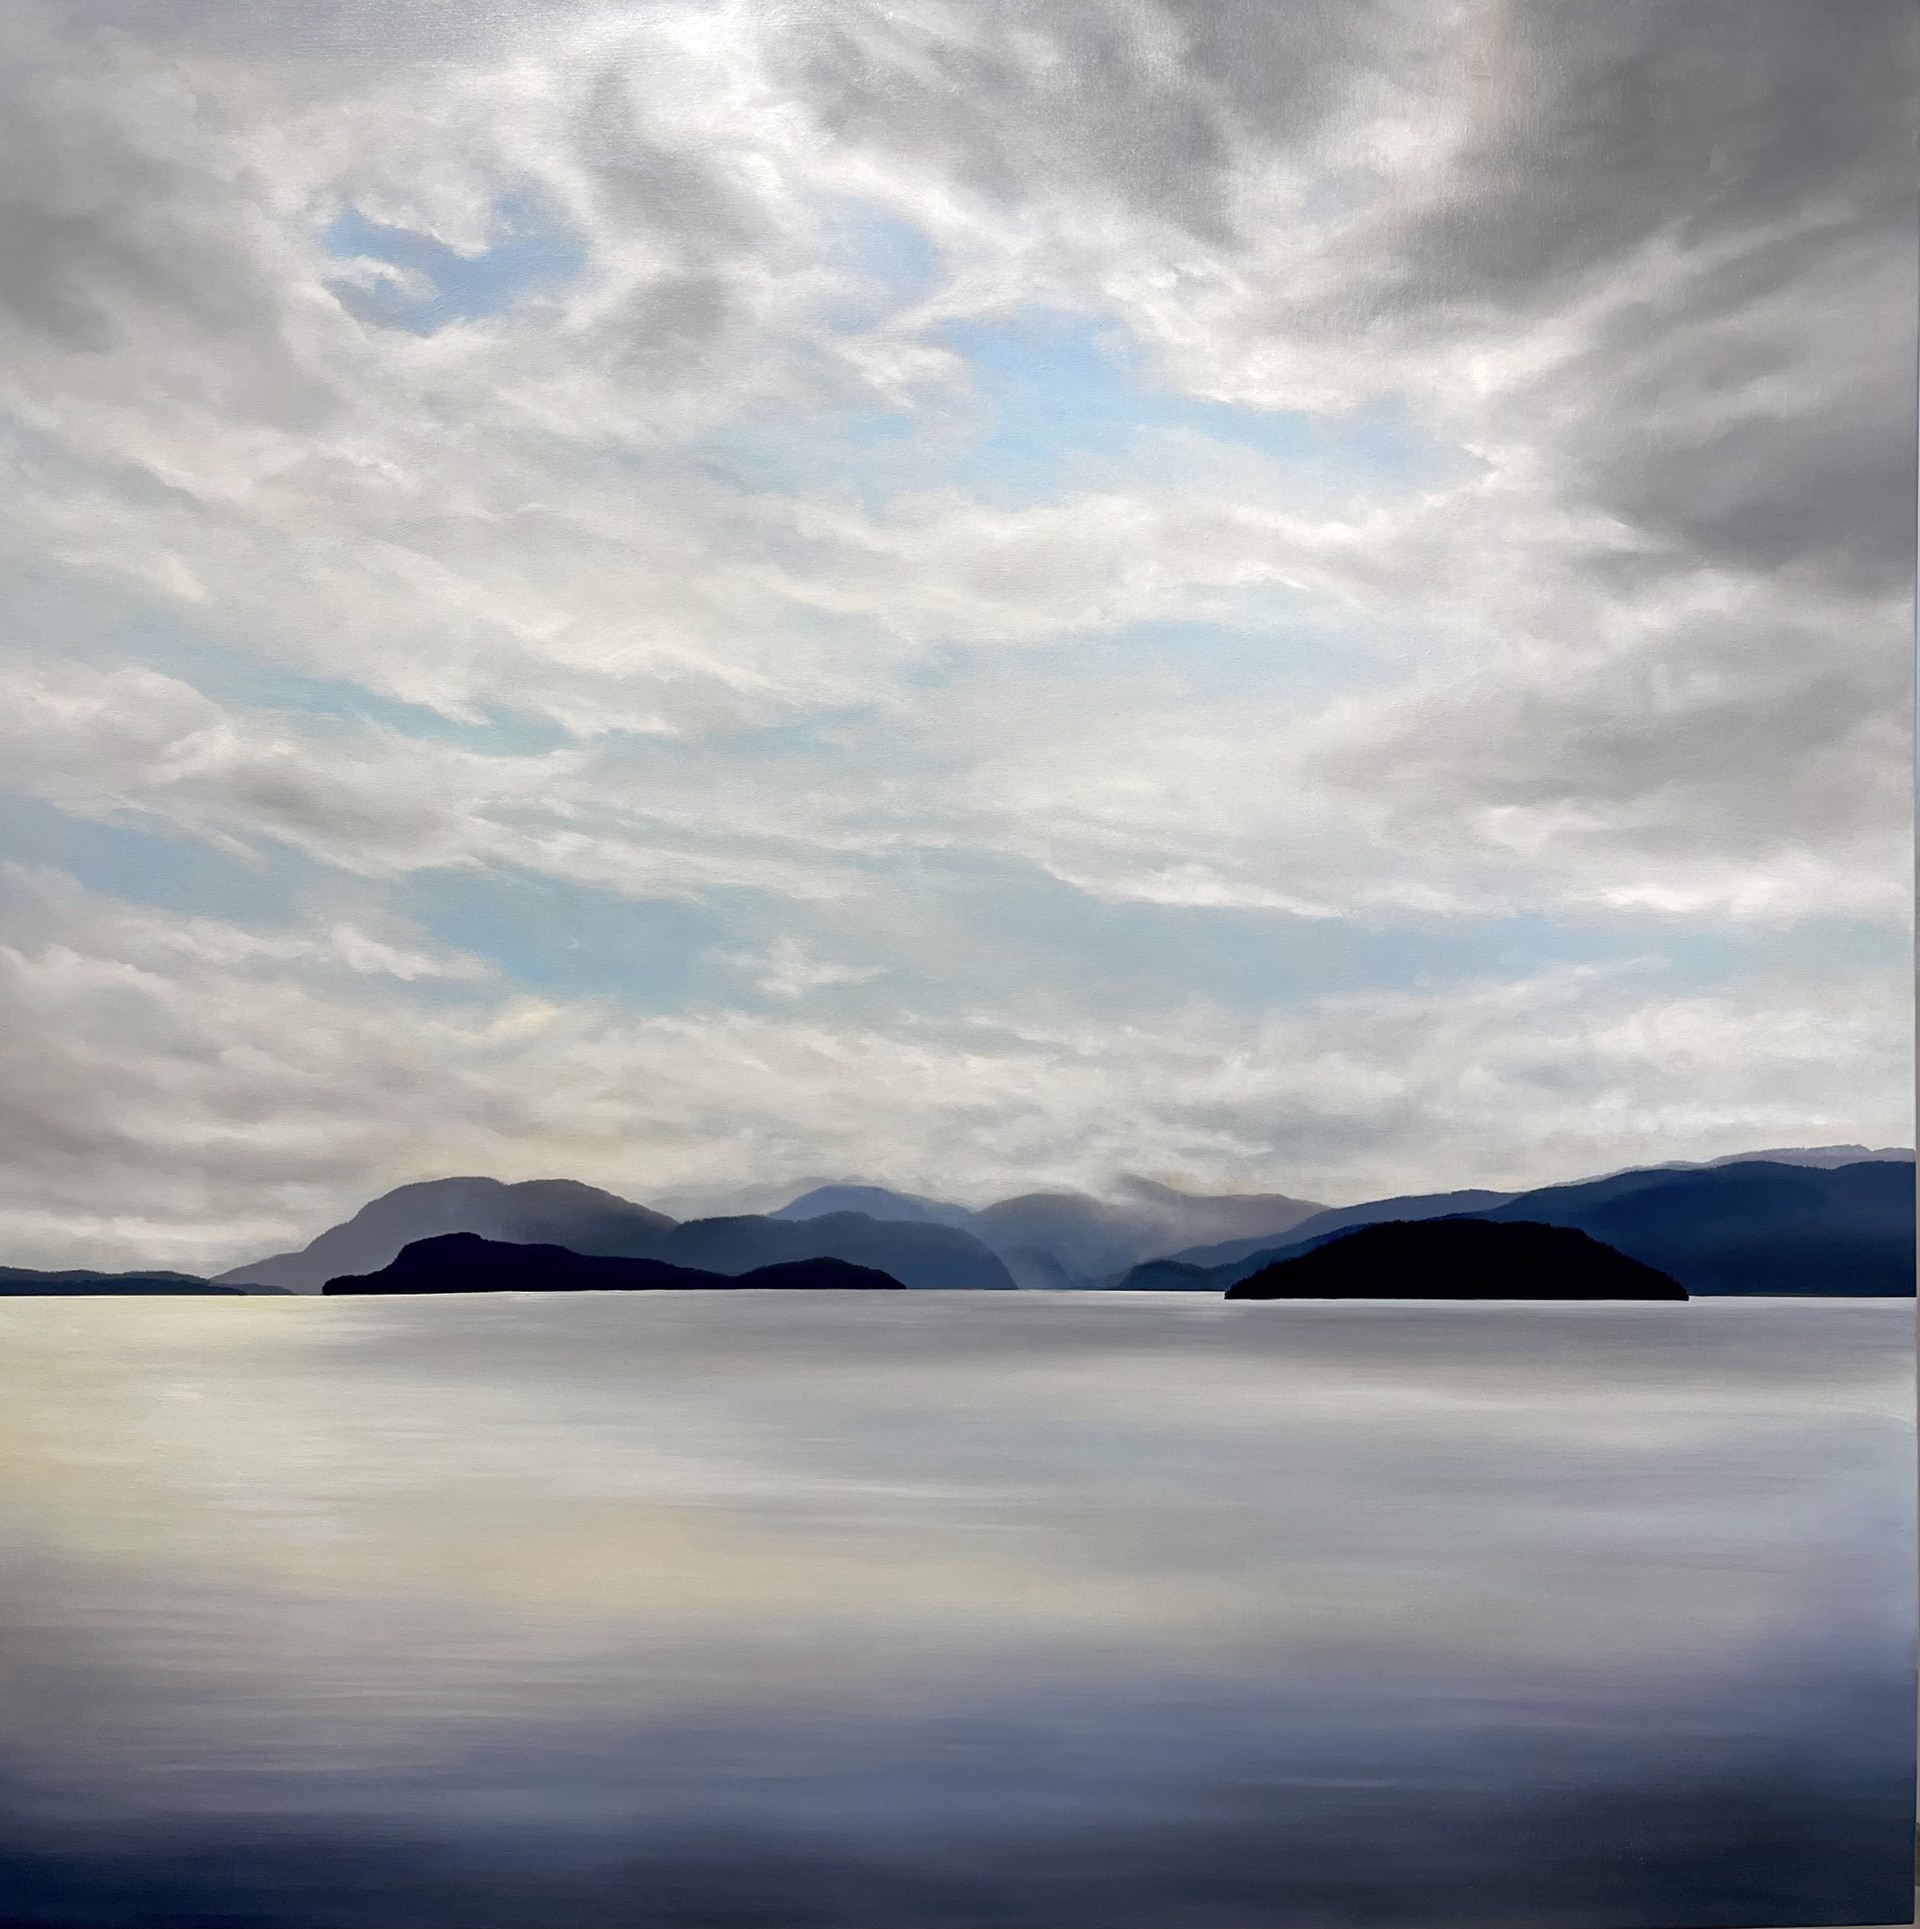 The Entrance to Howe Sound - Commission by Corrinne Wolcoski